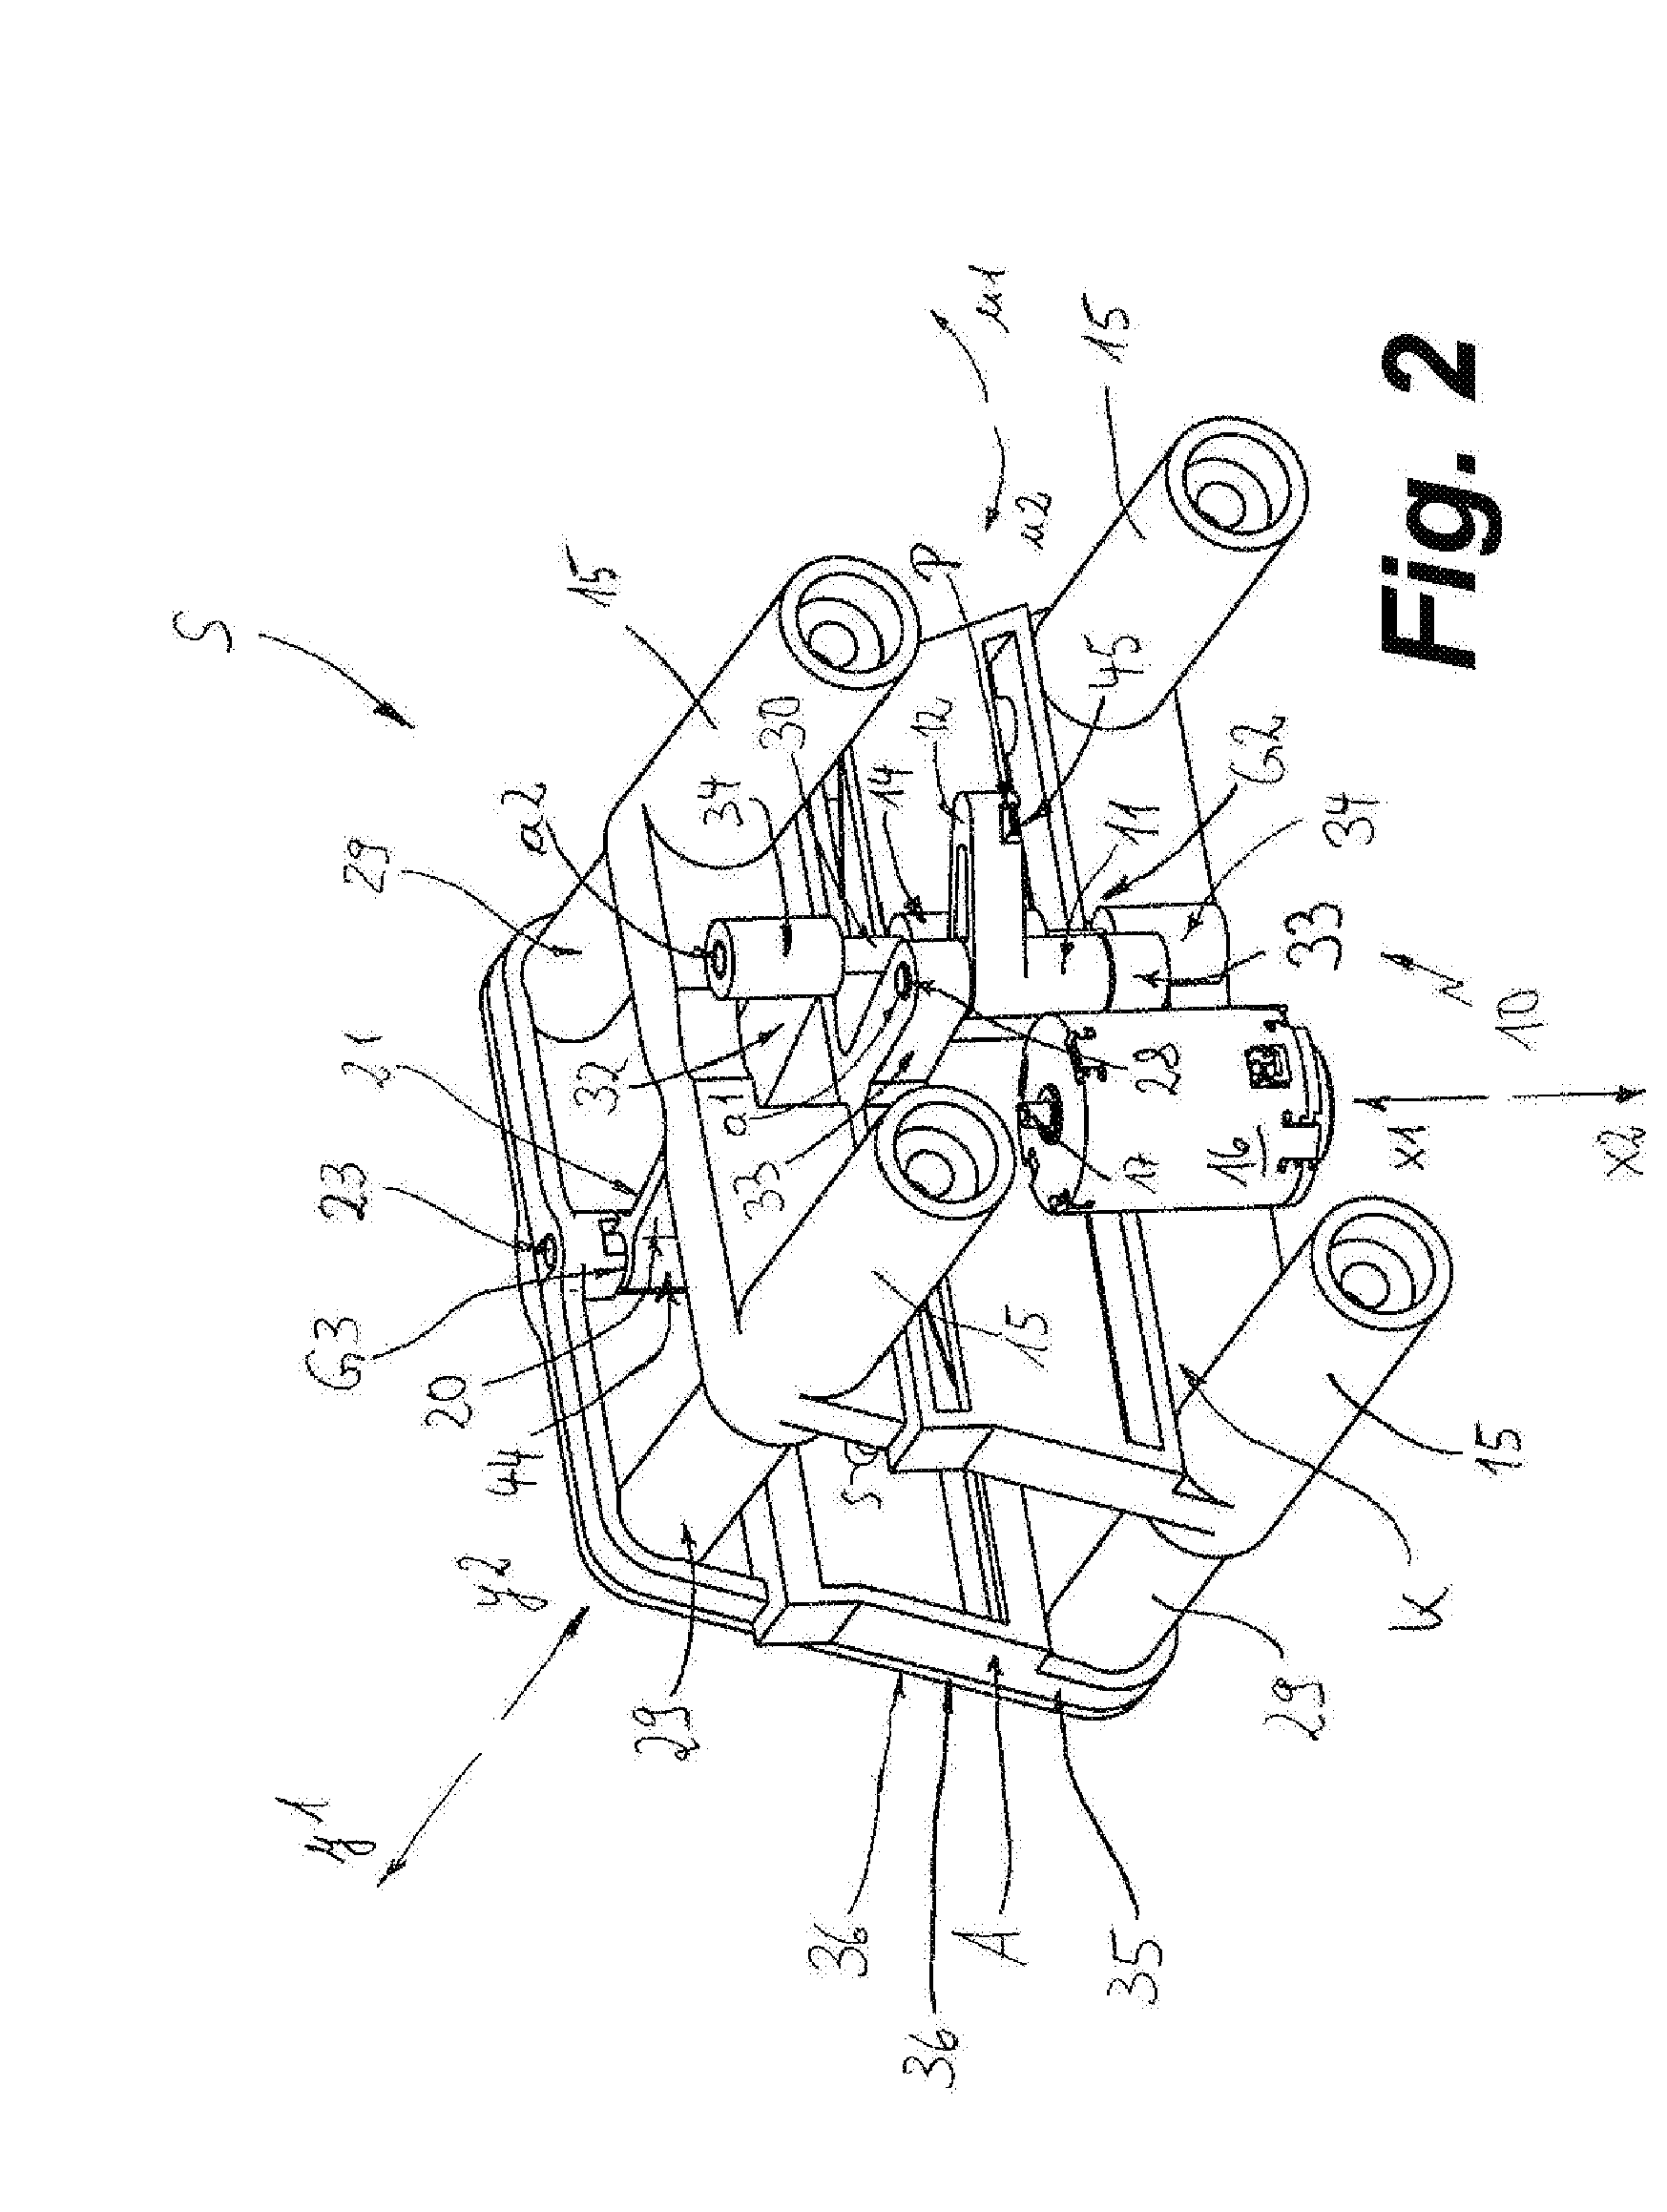 Latch for a motor-vehicle headrest